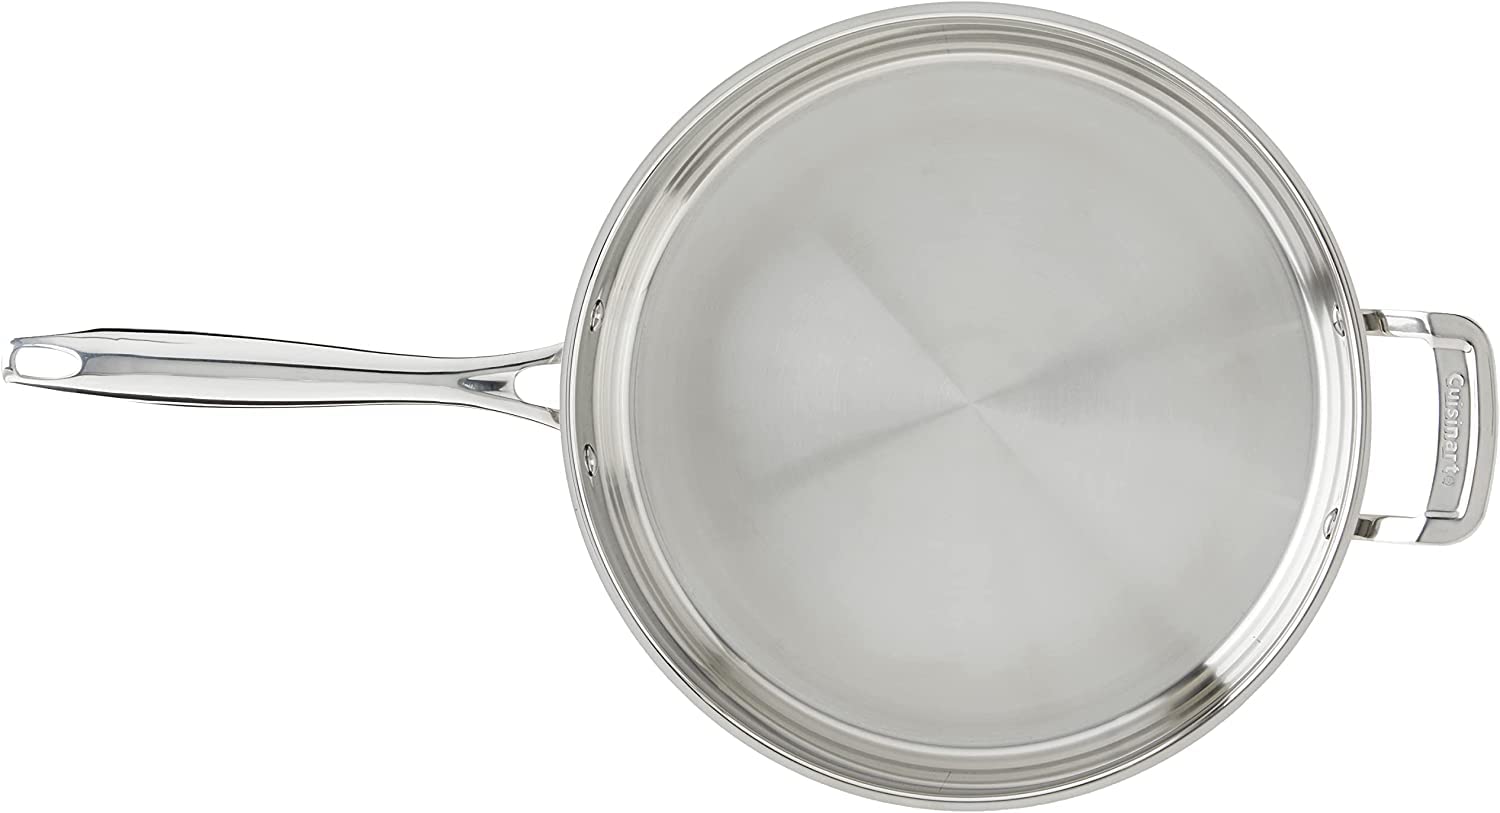 Cuisinart Professional Stainless Saute with Cover, 6-Quart